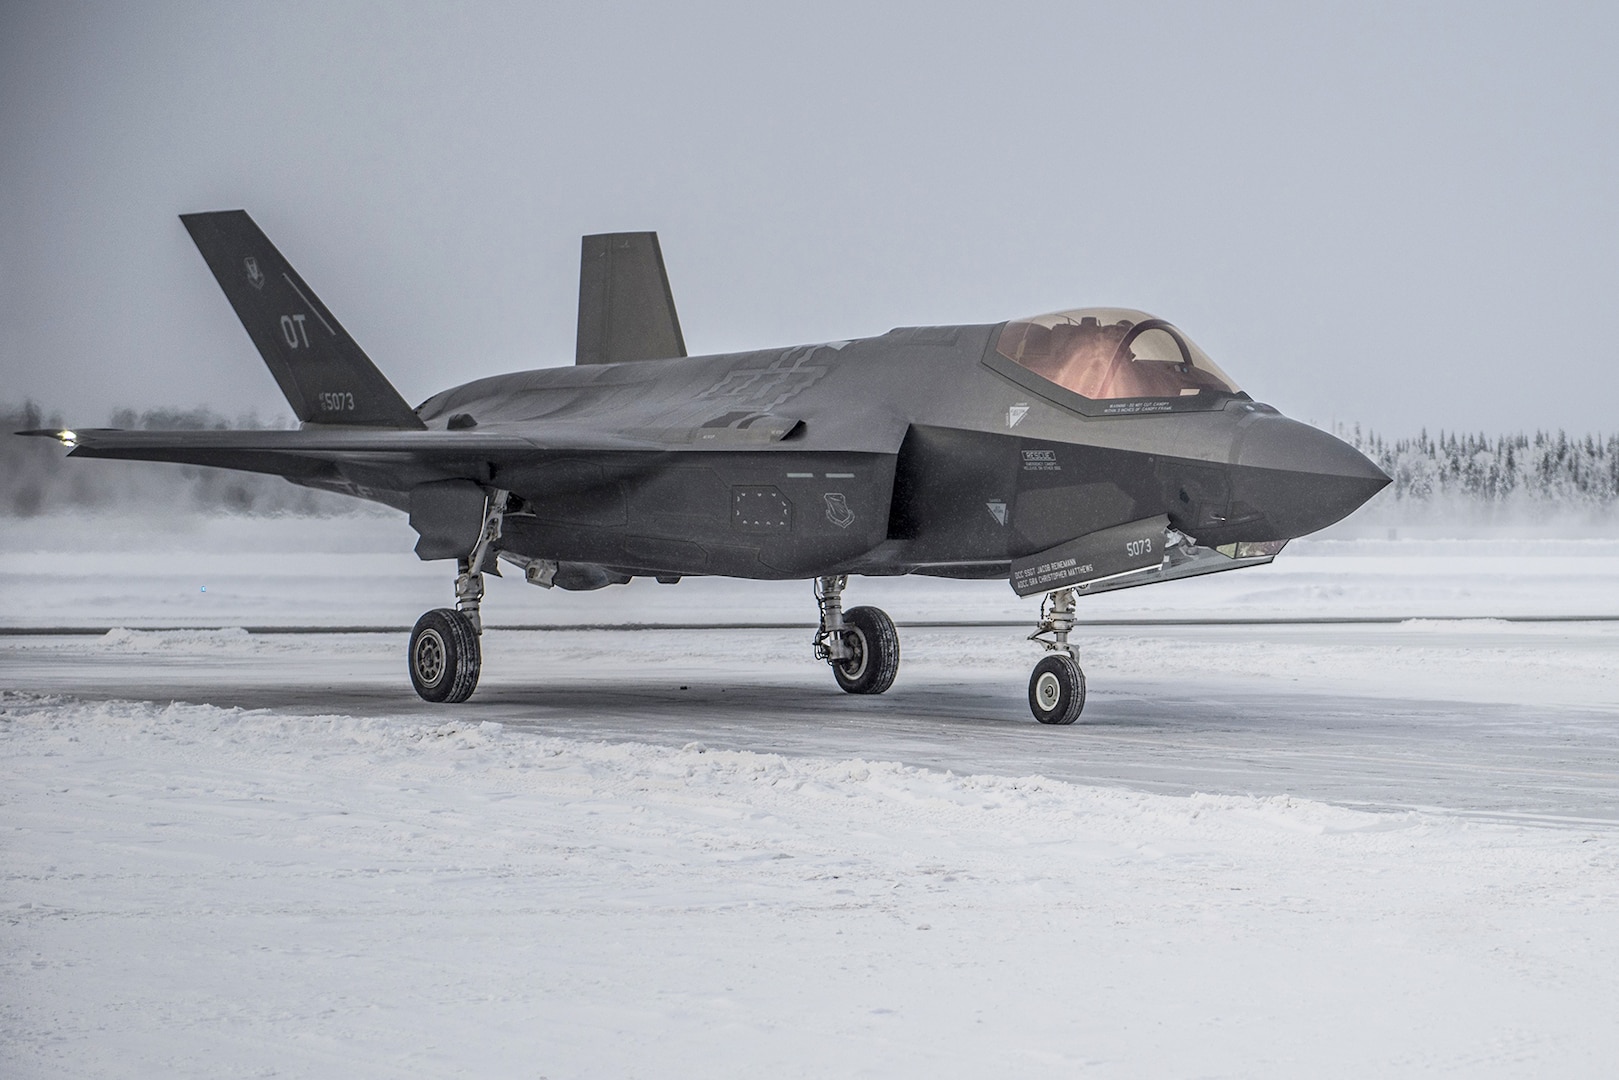 JOTT conducts F-35 pre-IOT&E cold weather testing at Eielson